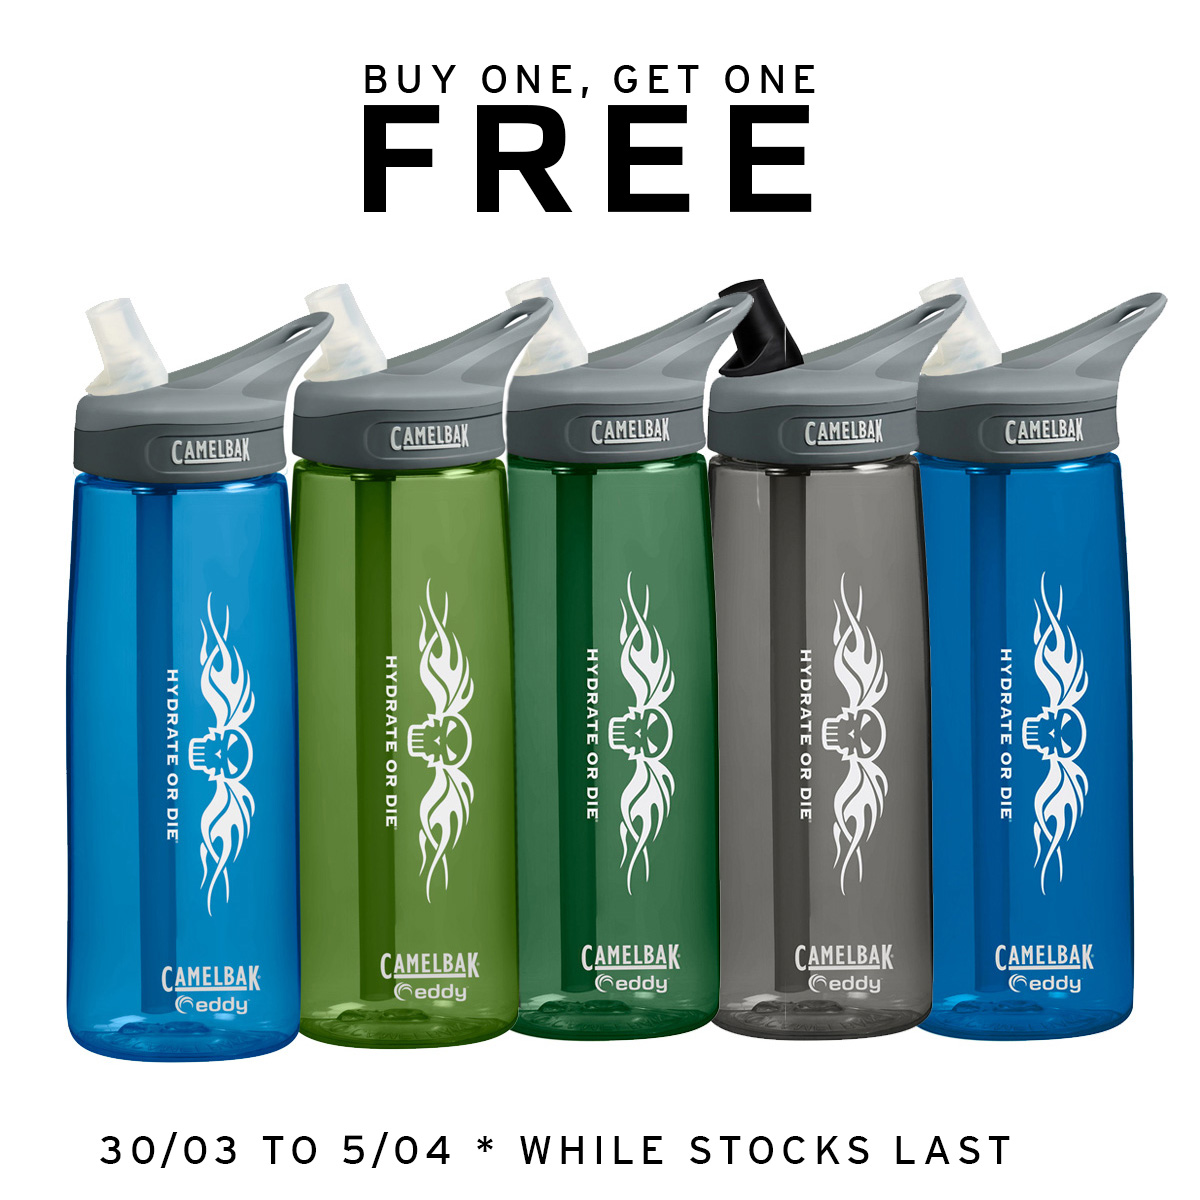 Camelbak Eddy HOD water bottle special. Buy one get one free.